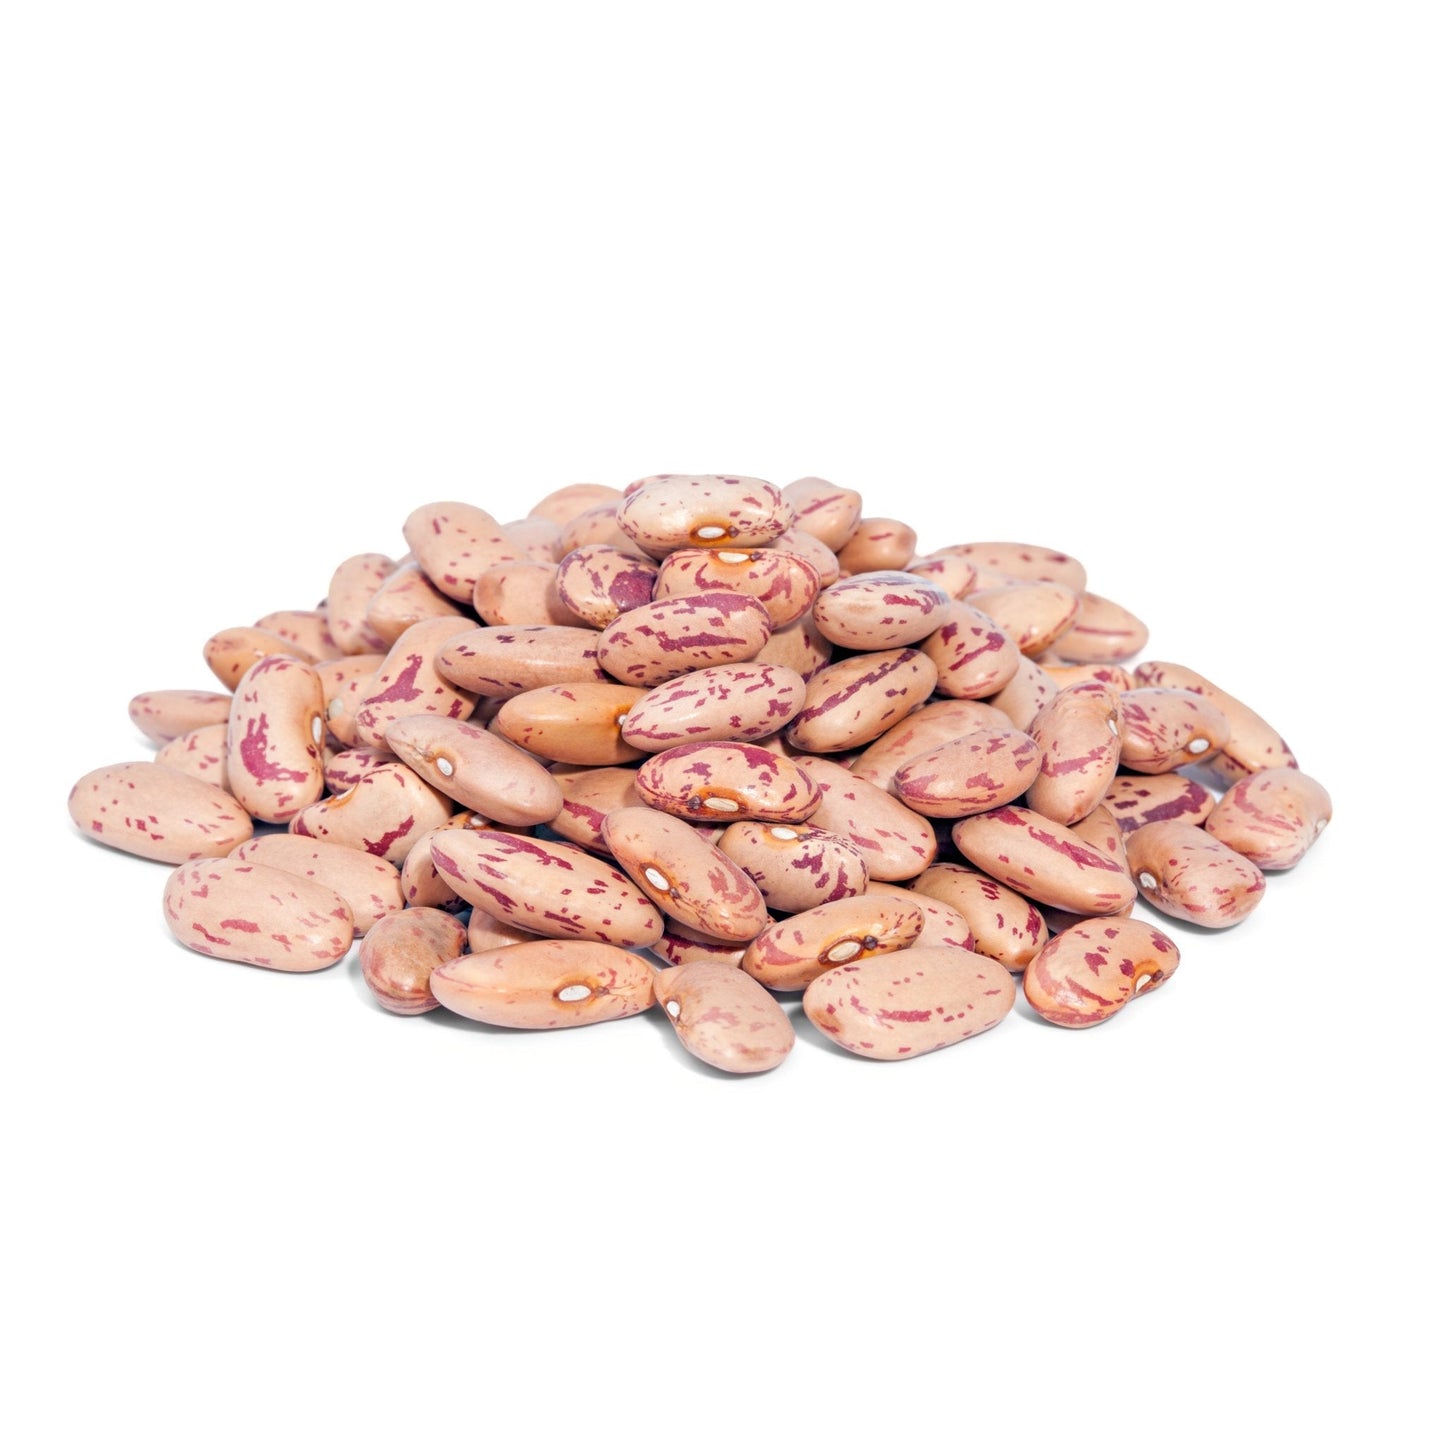 Cranberry Beans 25 lbs SPECIAL ORDER